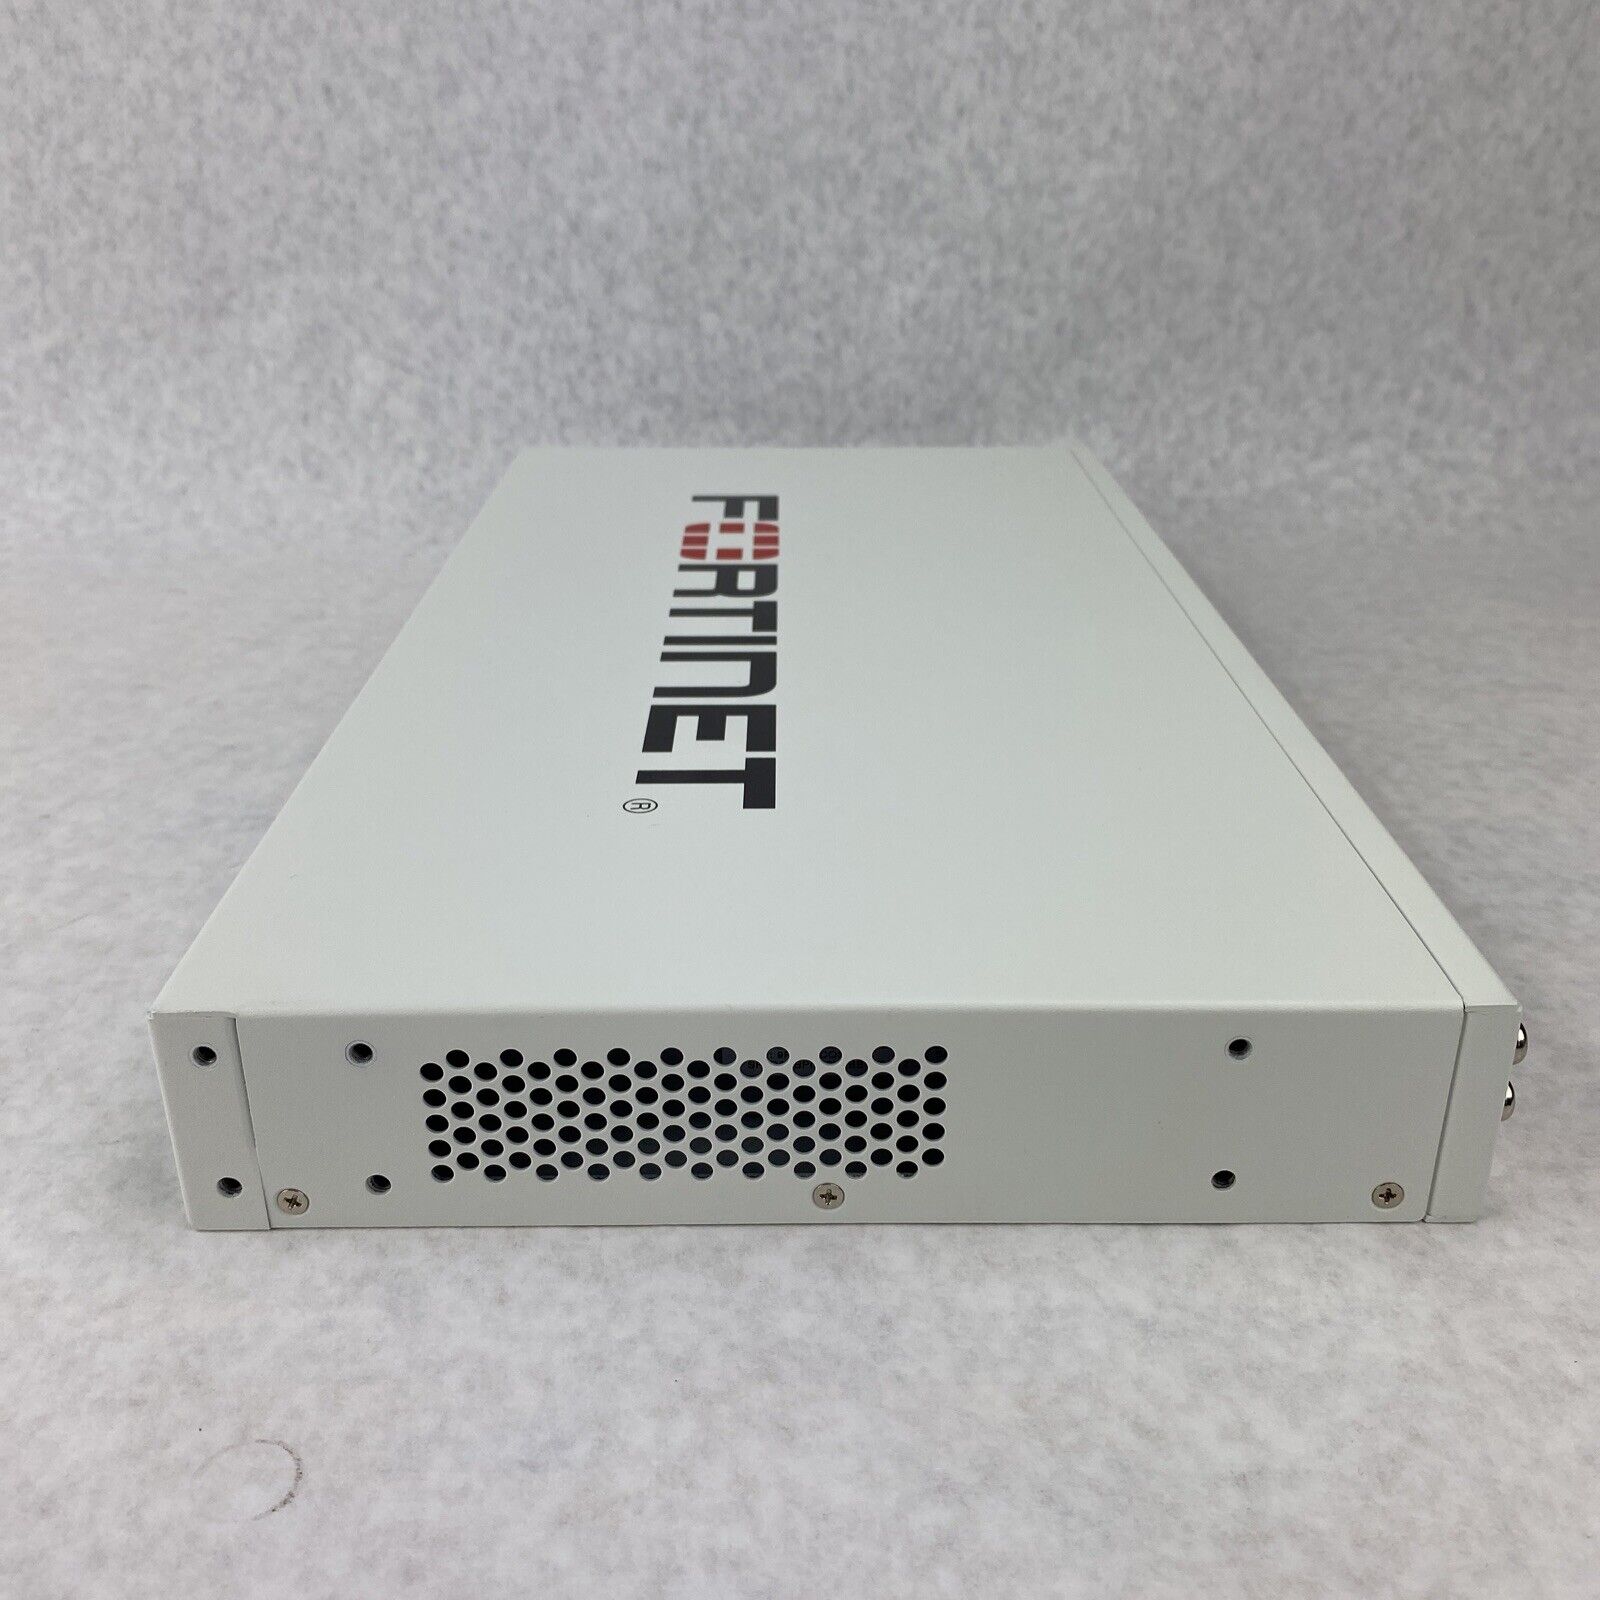 Fortinet FRPS-100 FORTIRPS 100 Redundant Power Supply